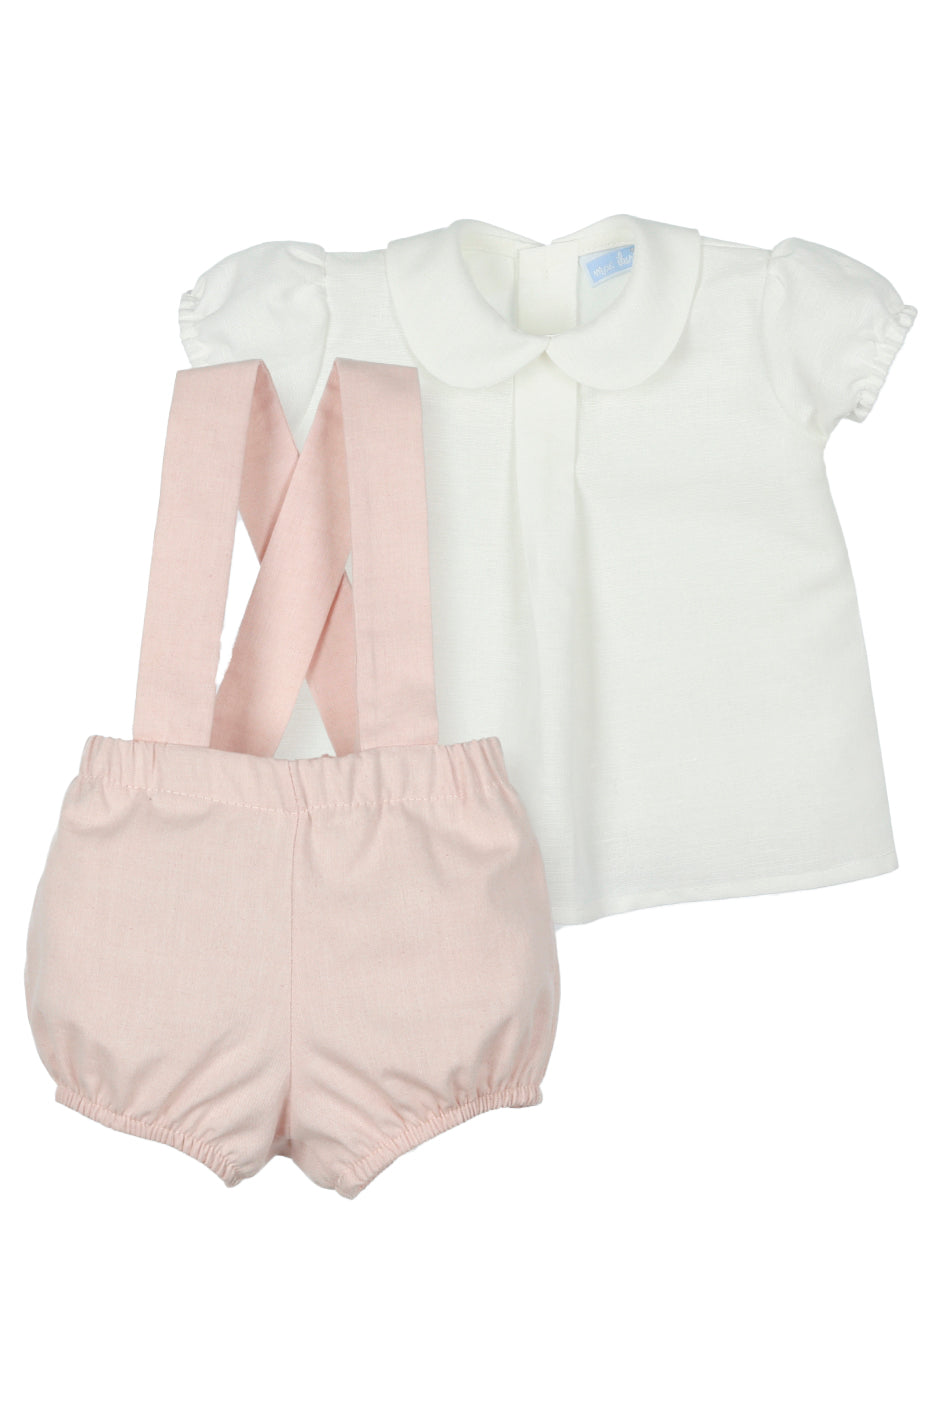 Mac Ilusión "Jarvis" Ivory Shirt & Pale Pink Shorts with Braces | Millie and John